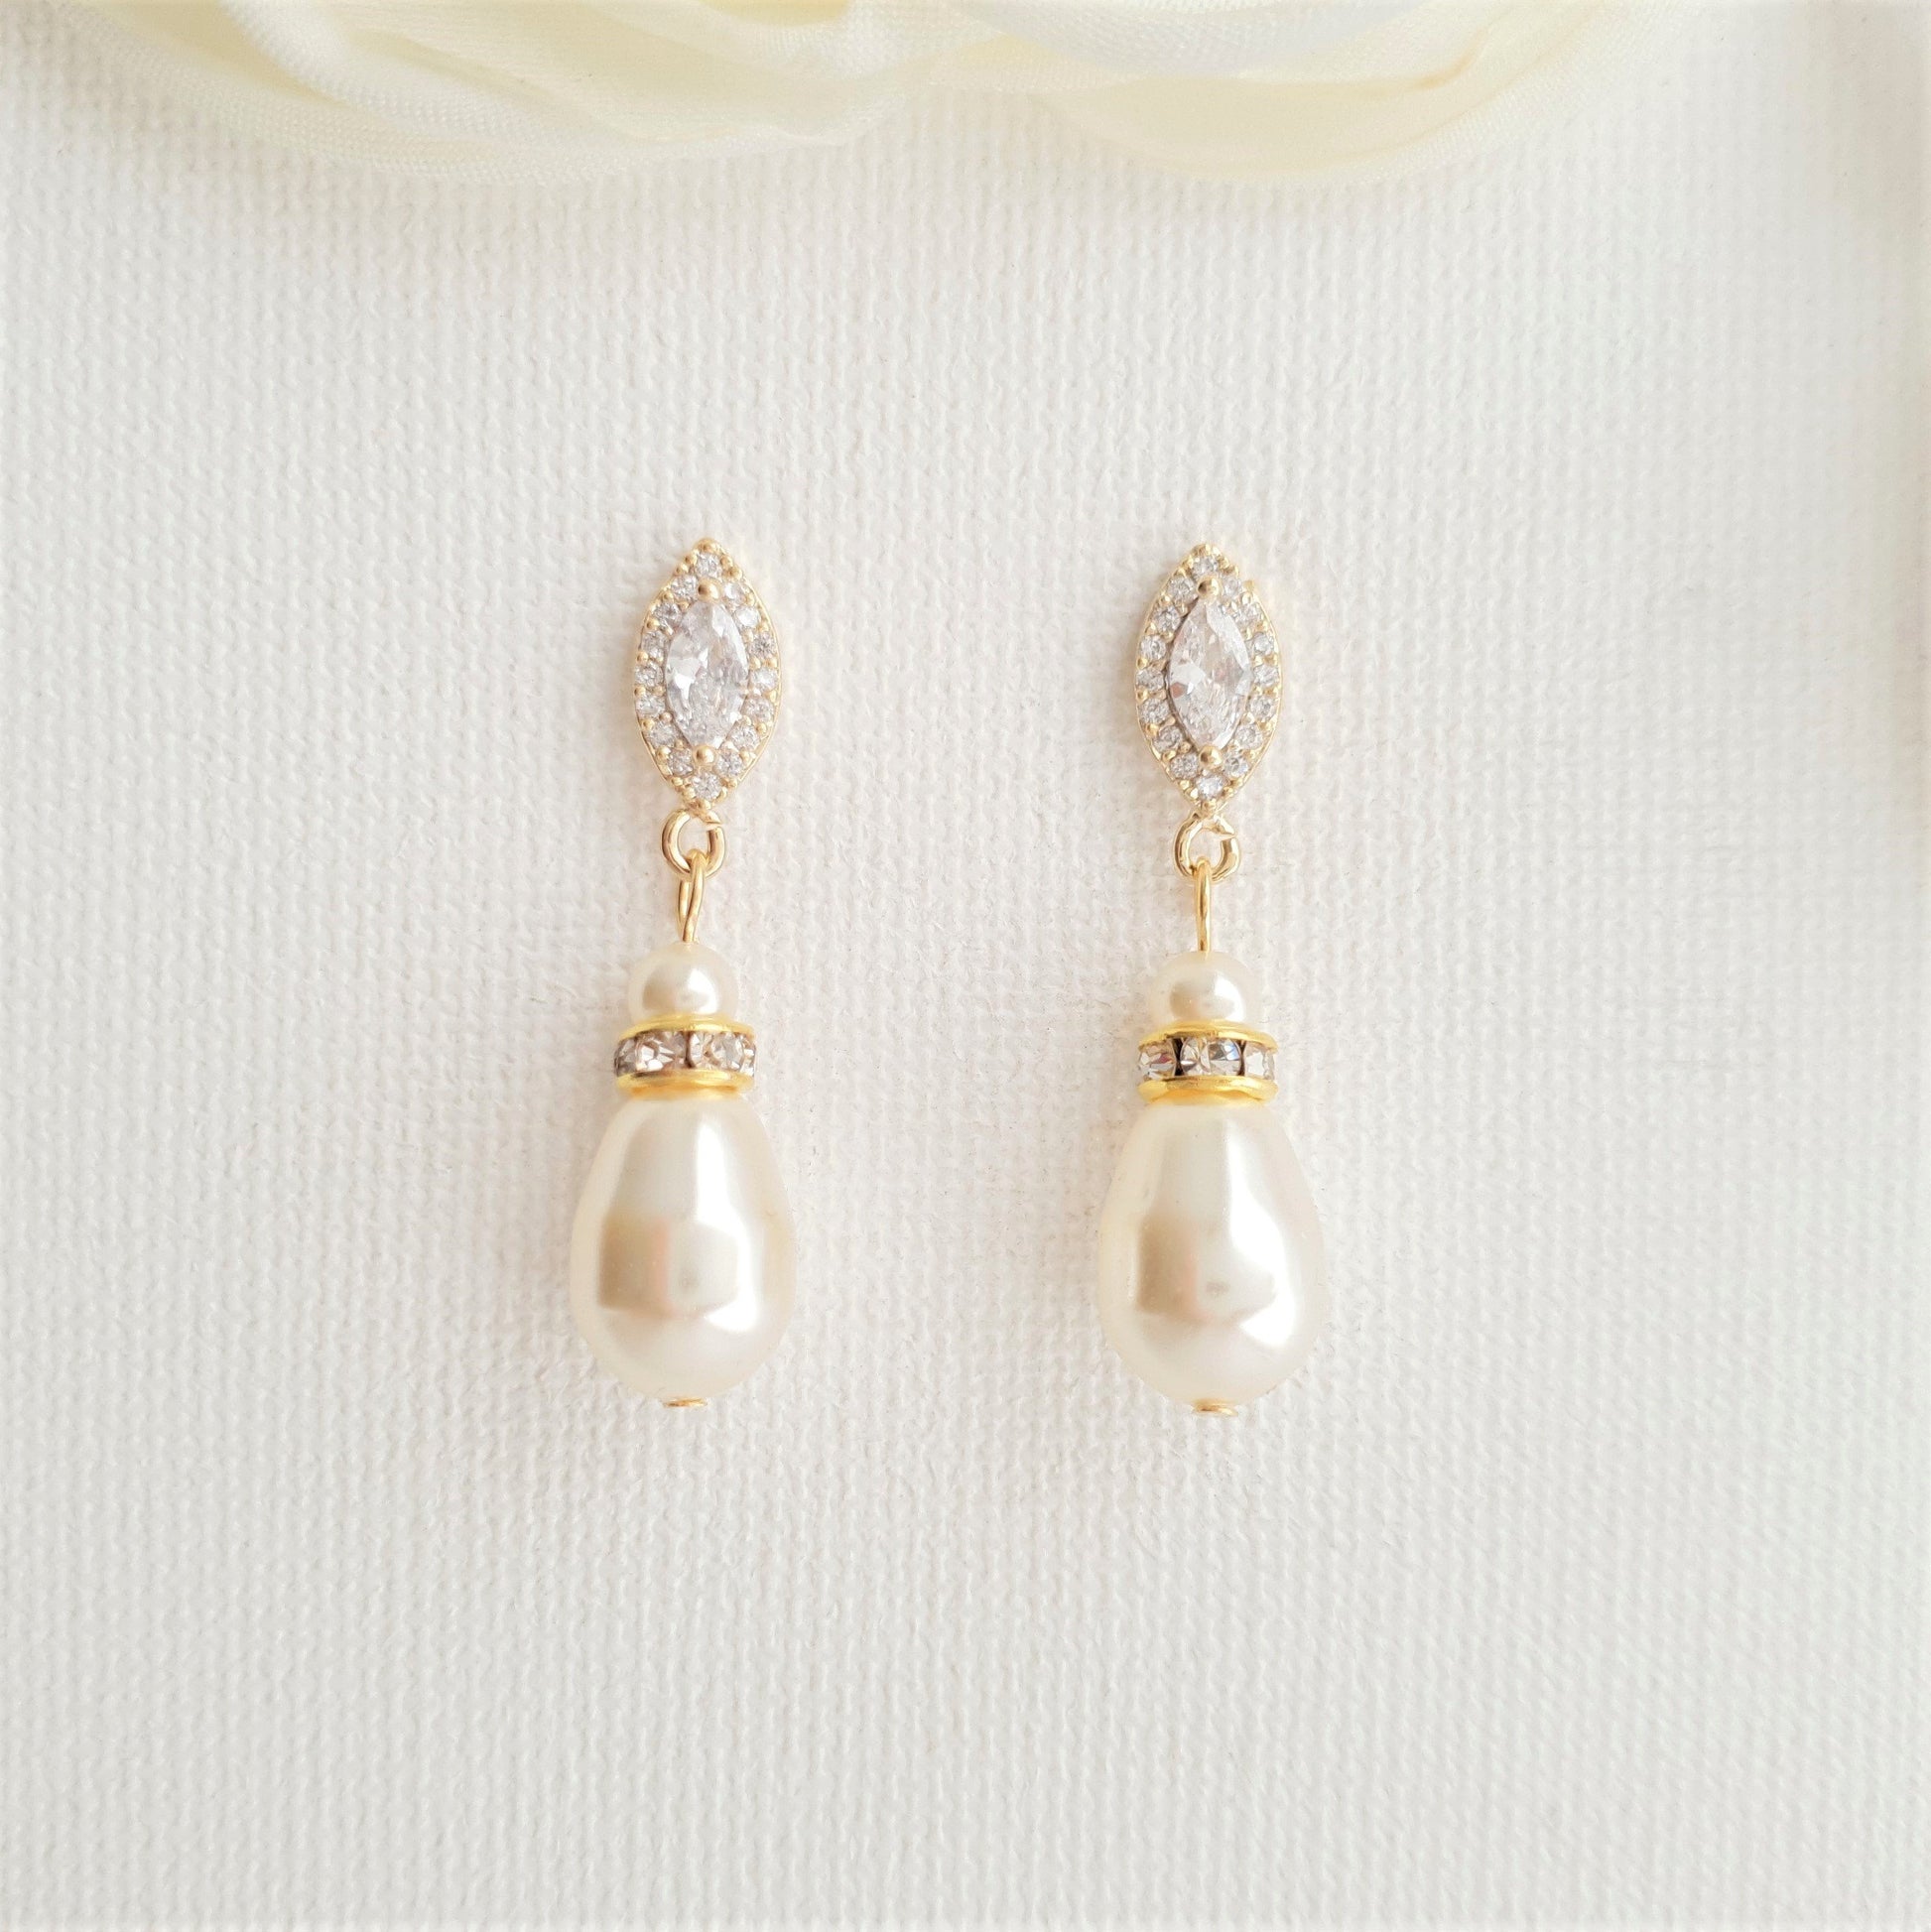 Gold Teardrop Pearl Earrings for Weddings with Cream or White